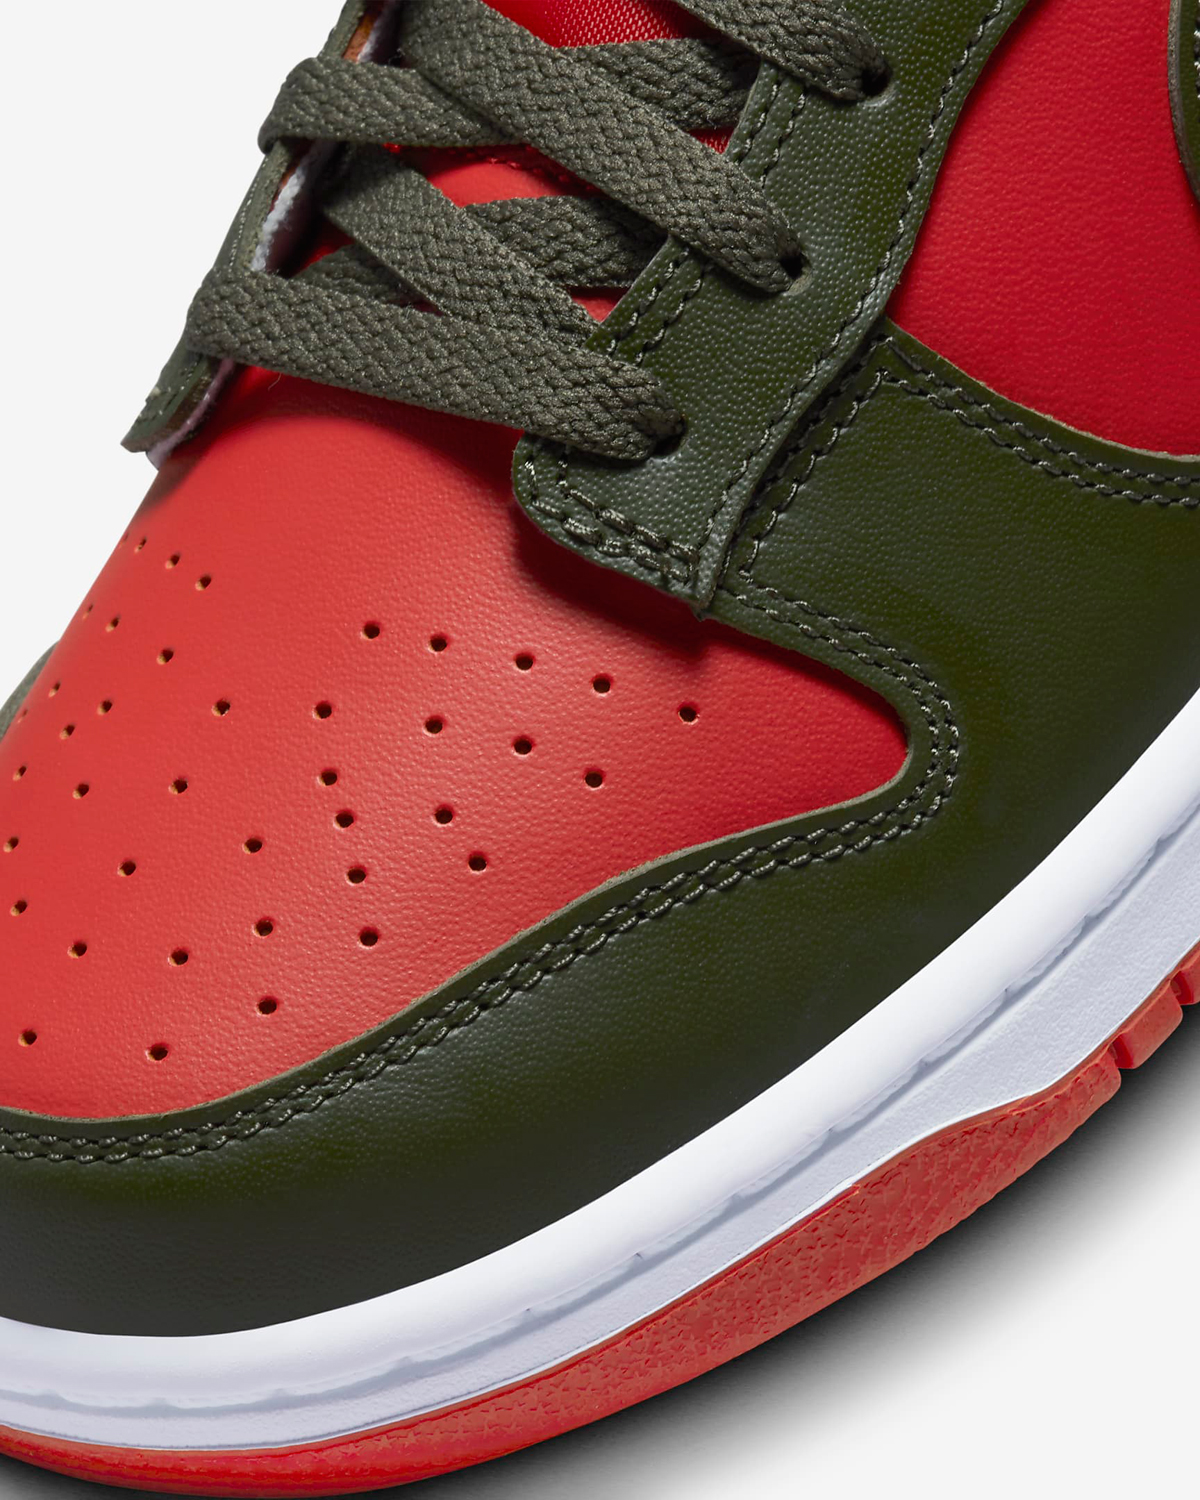 Nike-Dunk-Low-Mystic-Red-Cargo-Khaki-Release-Date-7